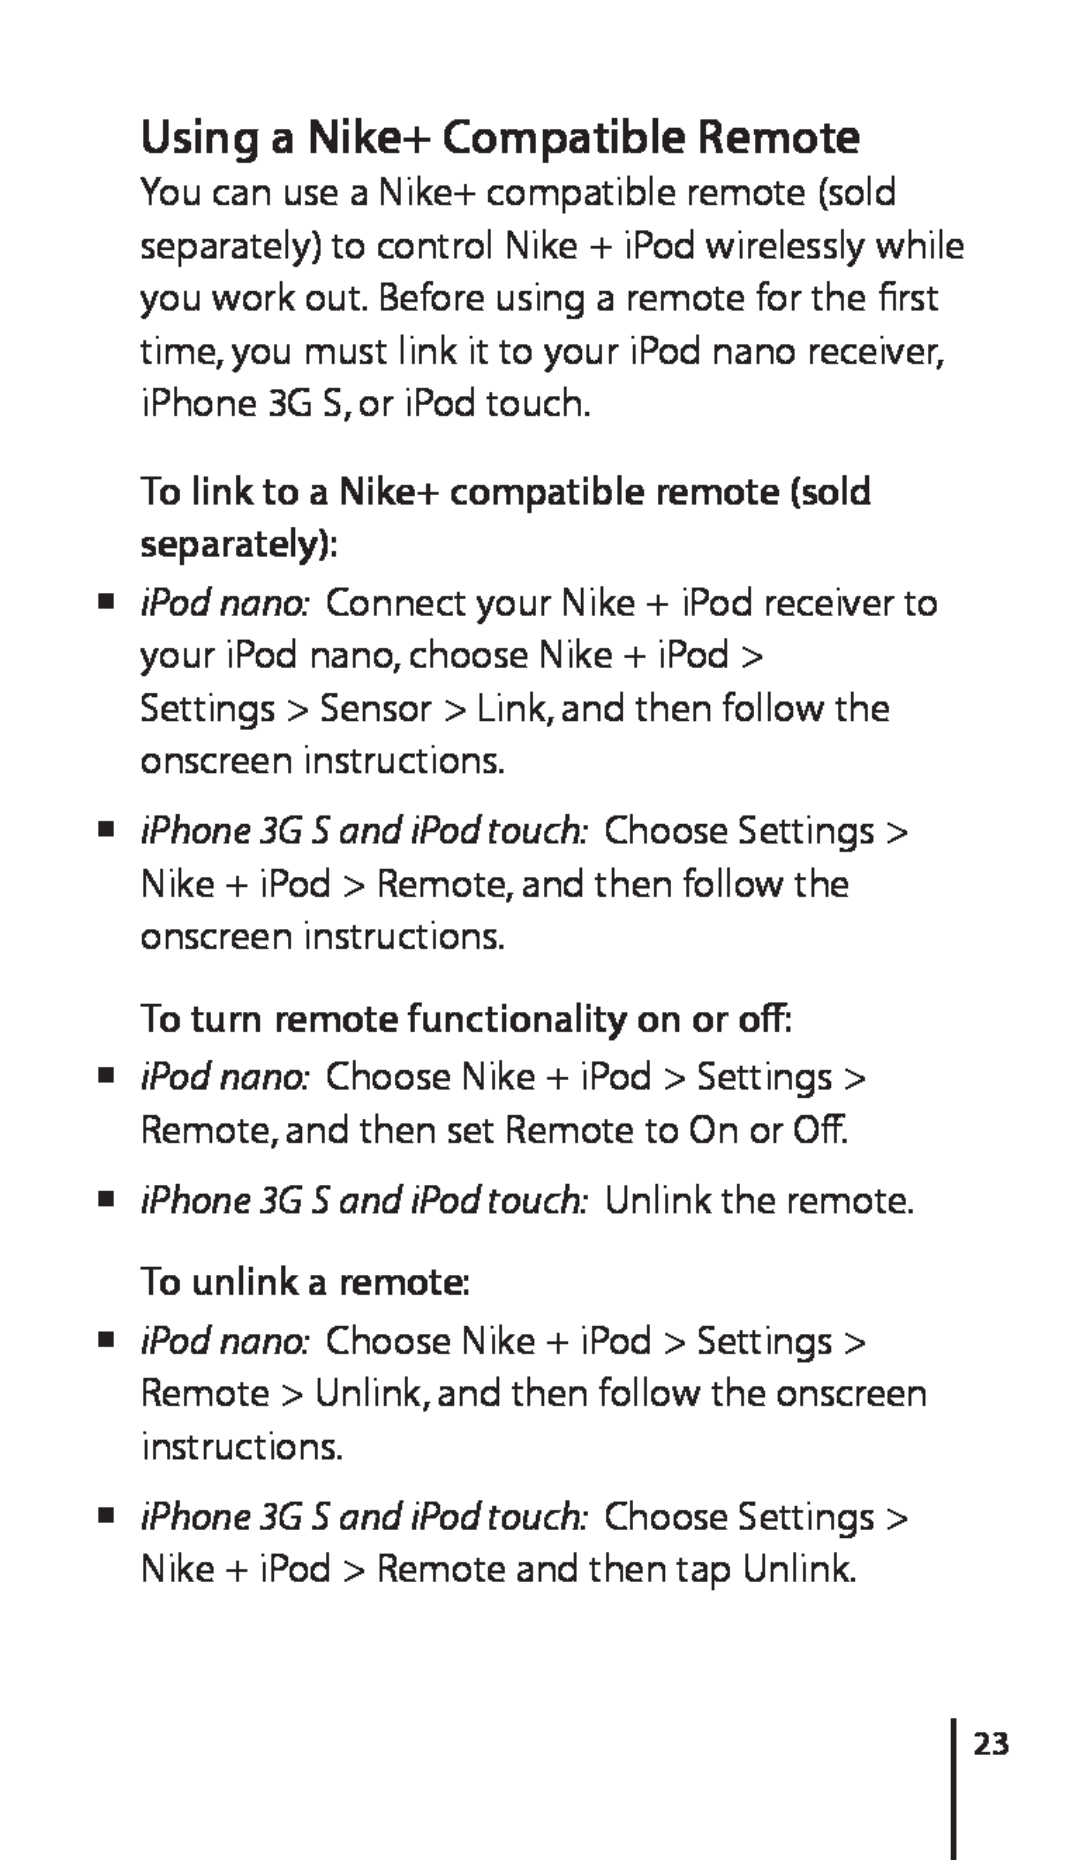 Apple 034-4945-A Using a Nike+ Compatible Remote, To link to a Nike+ compatible remote sold separately, To unlink a remote 